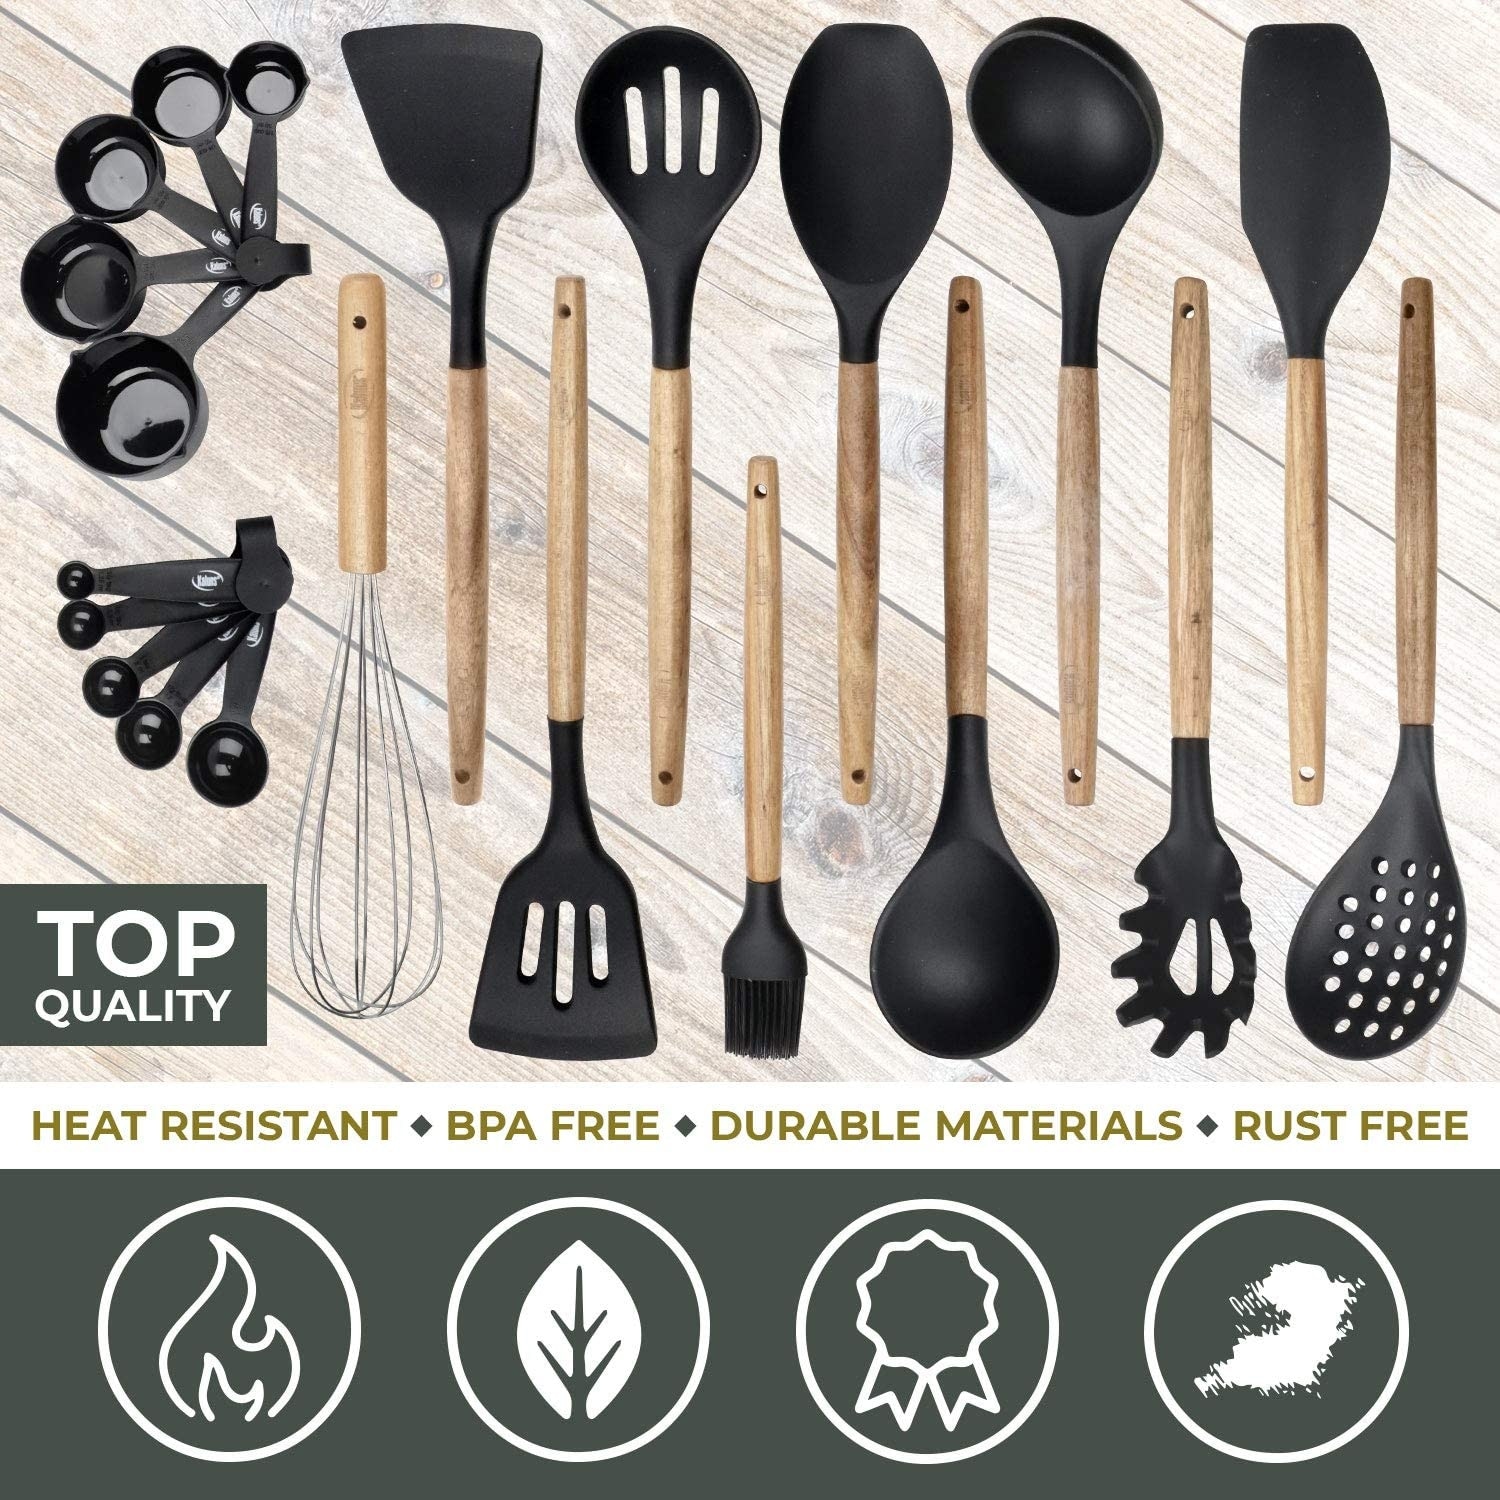 https://ak1.ostkcdn.com/images/products/is/images/direct/ec7a2c05bb4b49aec92afb03542ef1a20dfd2617/Kitchen-Utensils-Set%2C-21-Wood-and-Silicone-Cooking-Utensil-Set.jpg